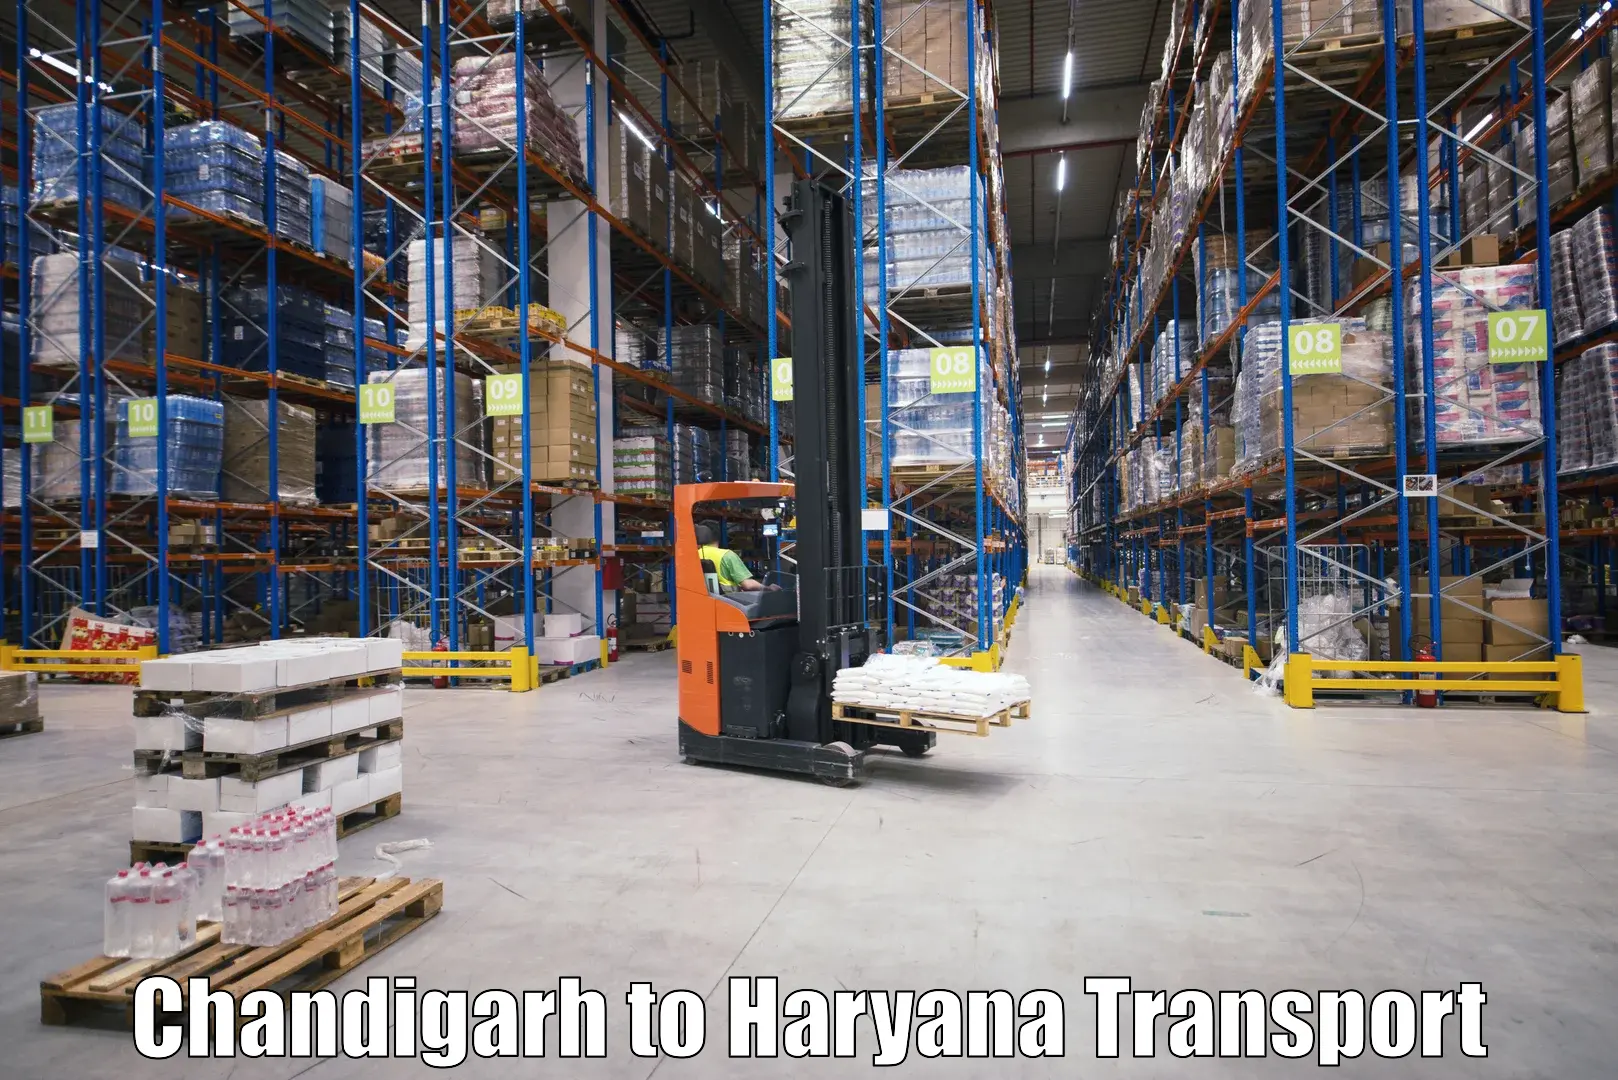 Air cargo transport services Chandigarh to Haryana